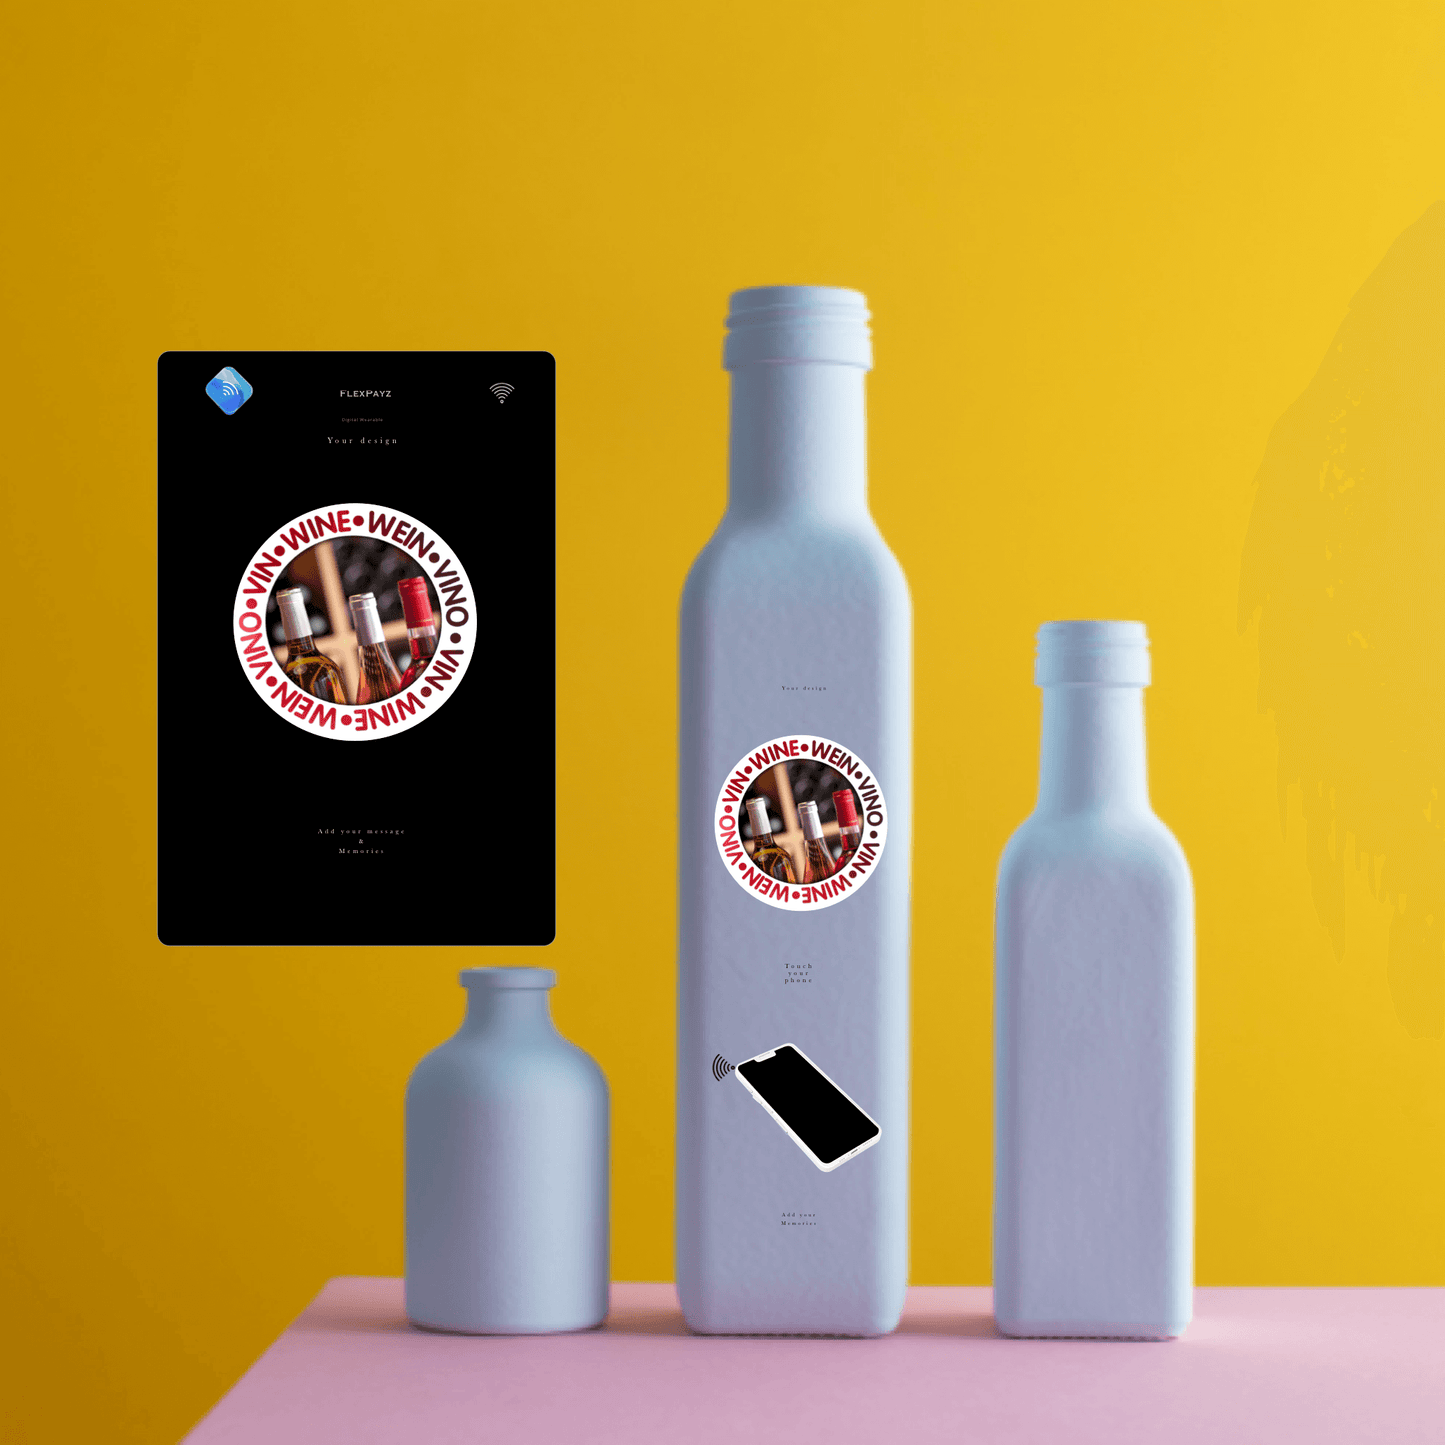 Digital Contactless Gift/Bottle's Label